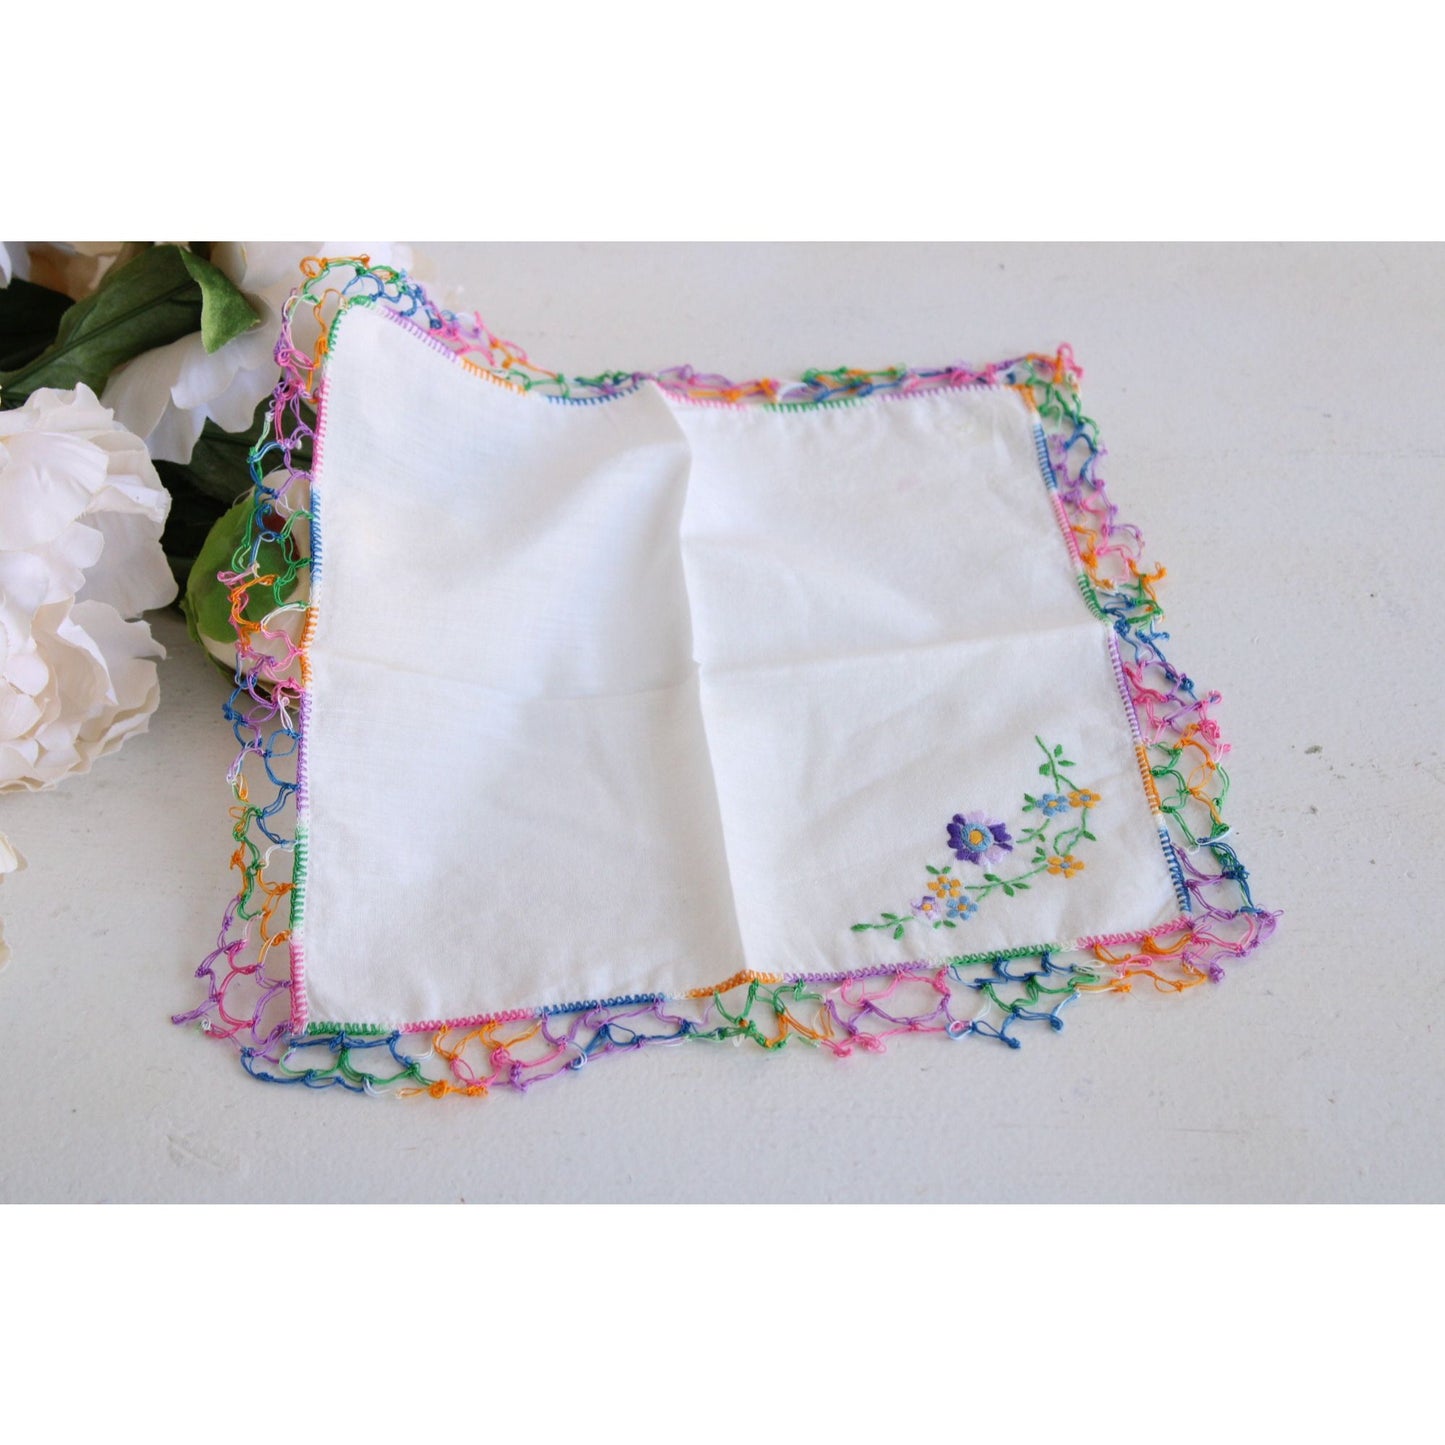 Vintage 1960s White Linen With Rainbow Crochet Trim and Embroidered Flowers Hanky